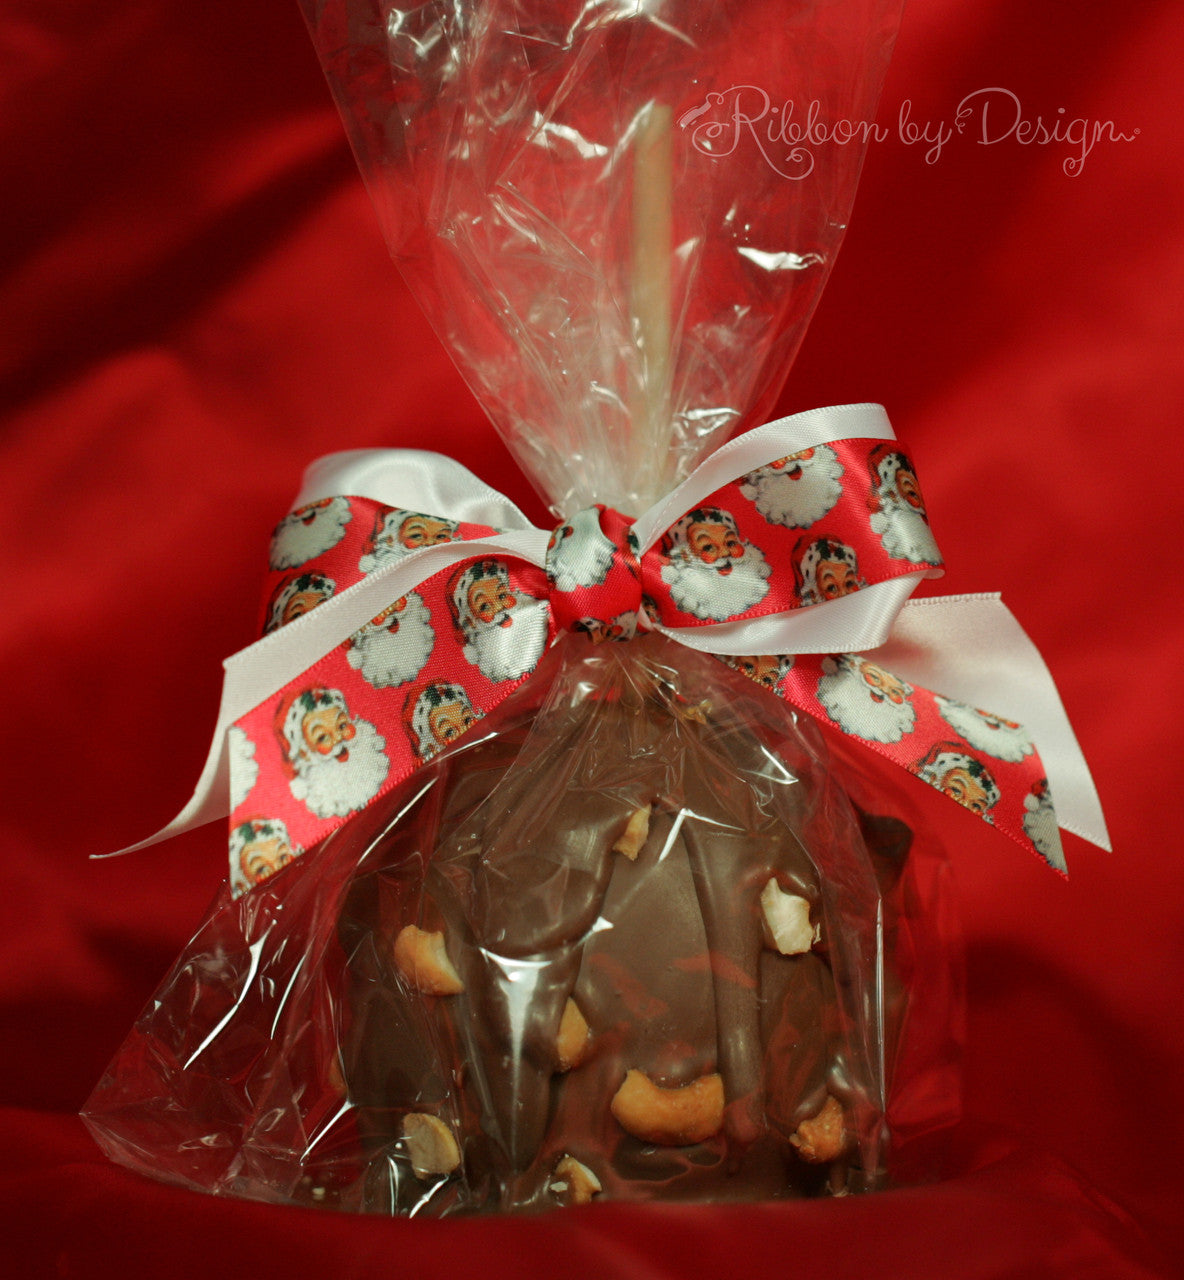 Combining a plain ribbon with a printed ribbon makes for a truly elegant presentation to this beautiful chocolate apple